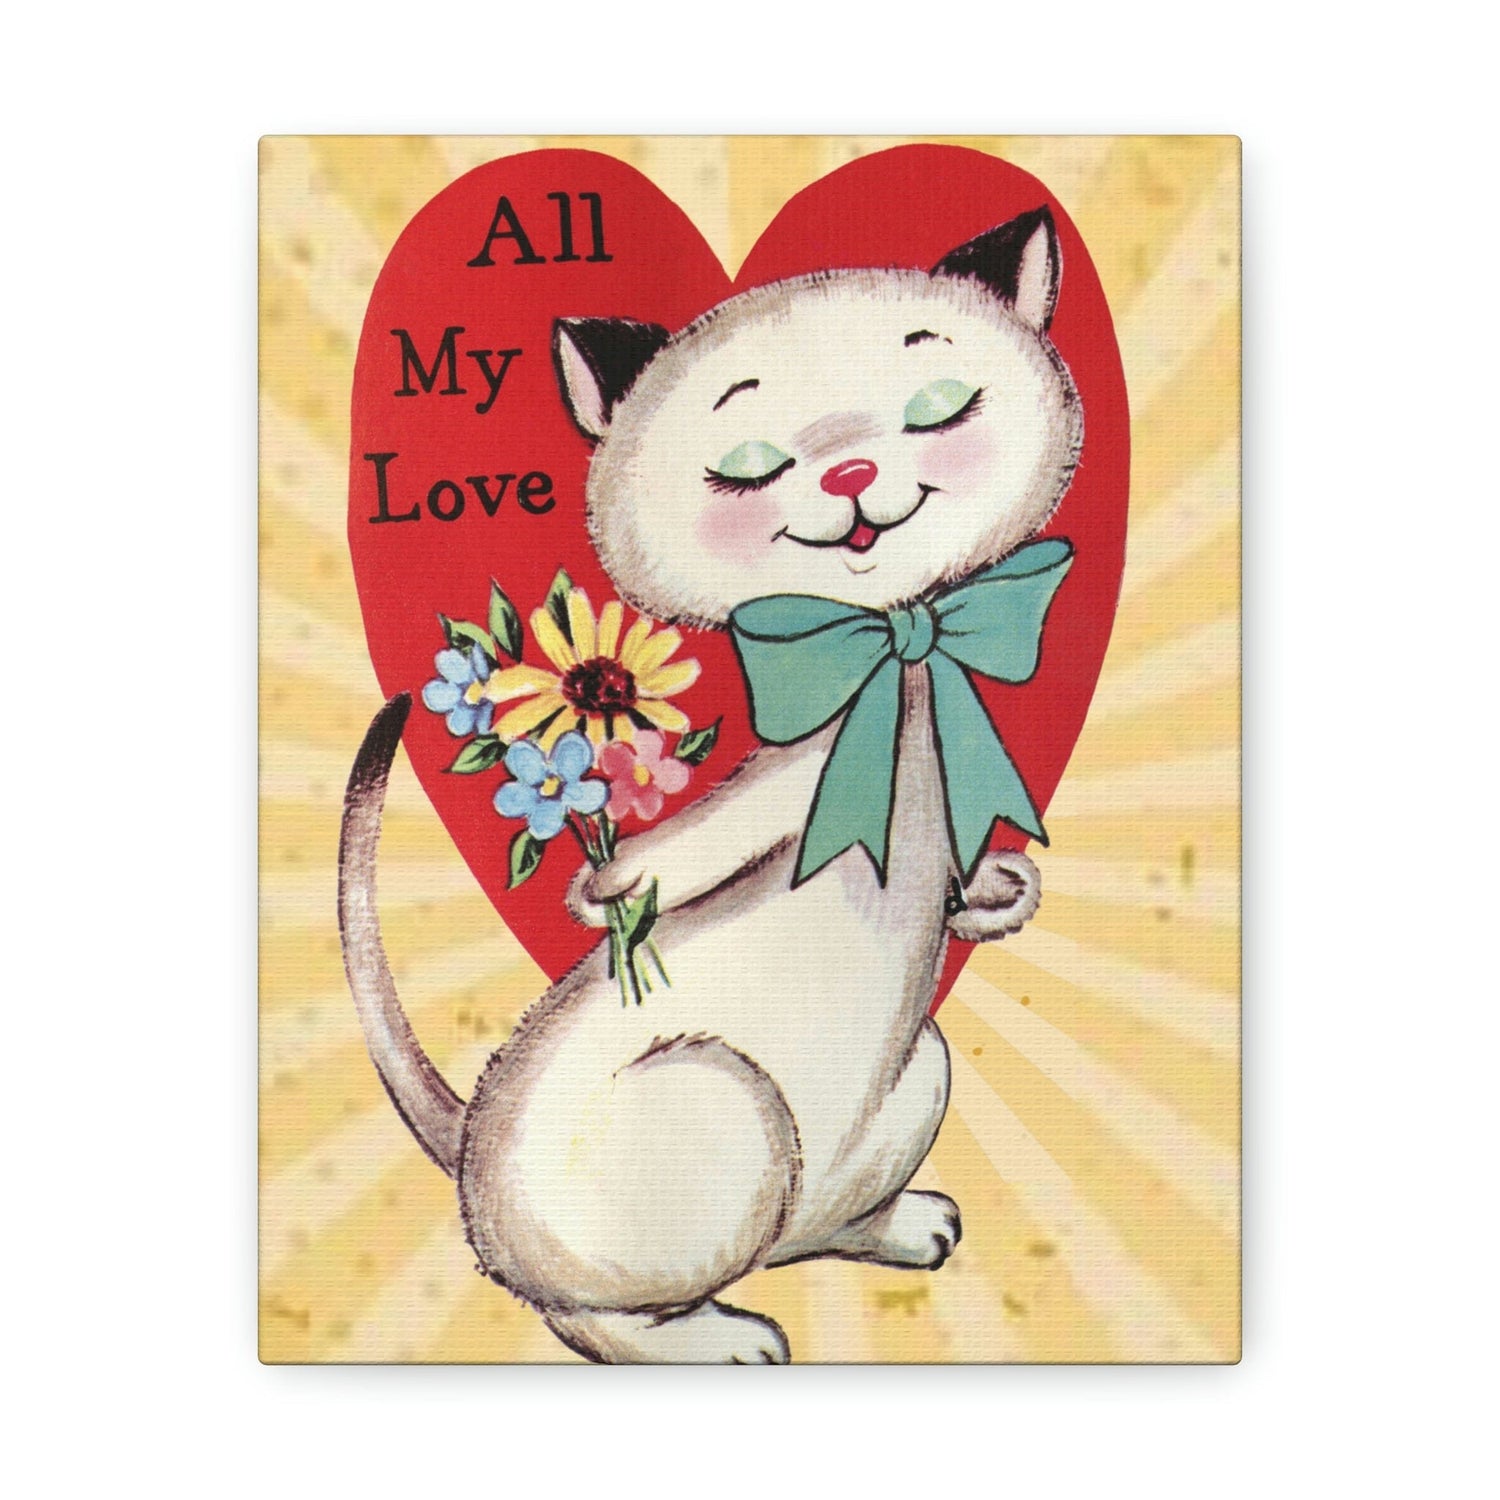 Vintage Retro Valentine Card, Cute White Kitschy Cat All My Love, Valentine  Gifts for Her - 7579699609755